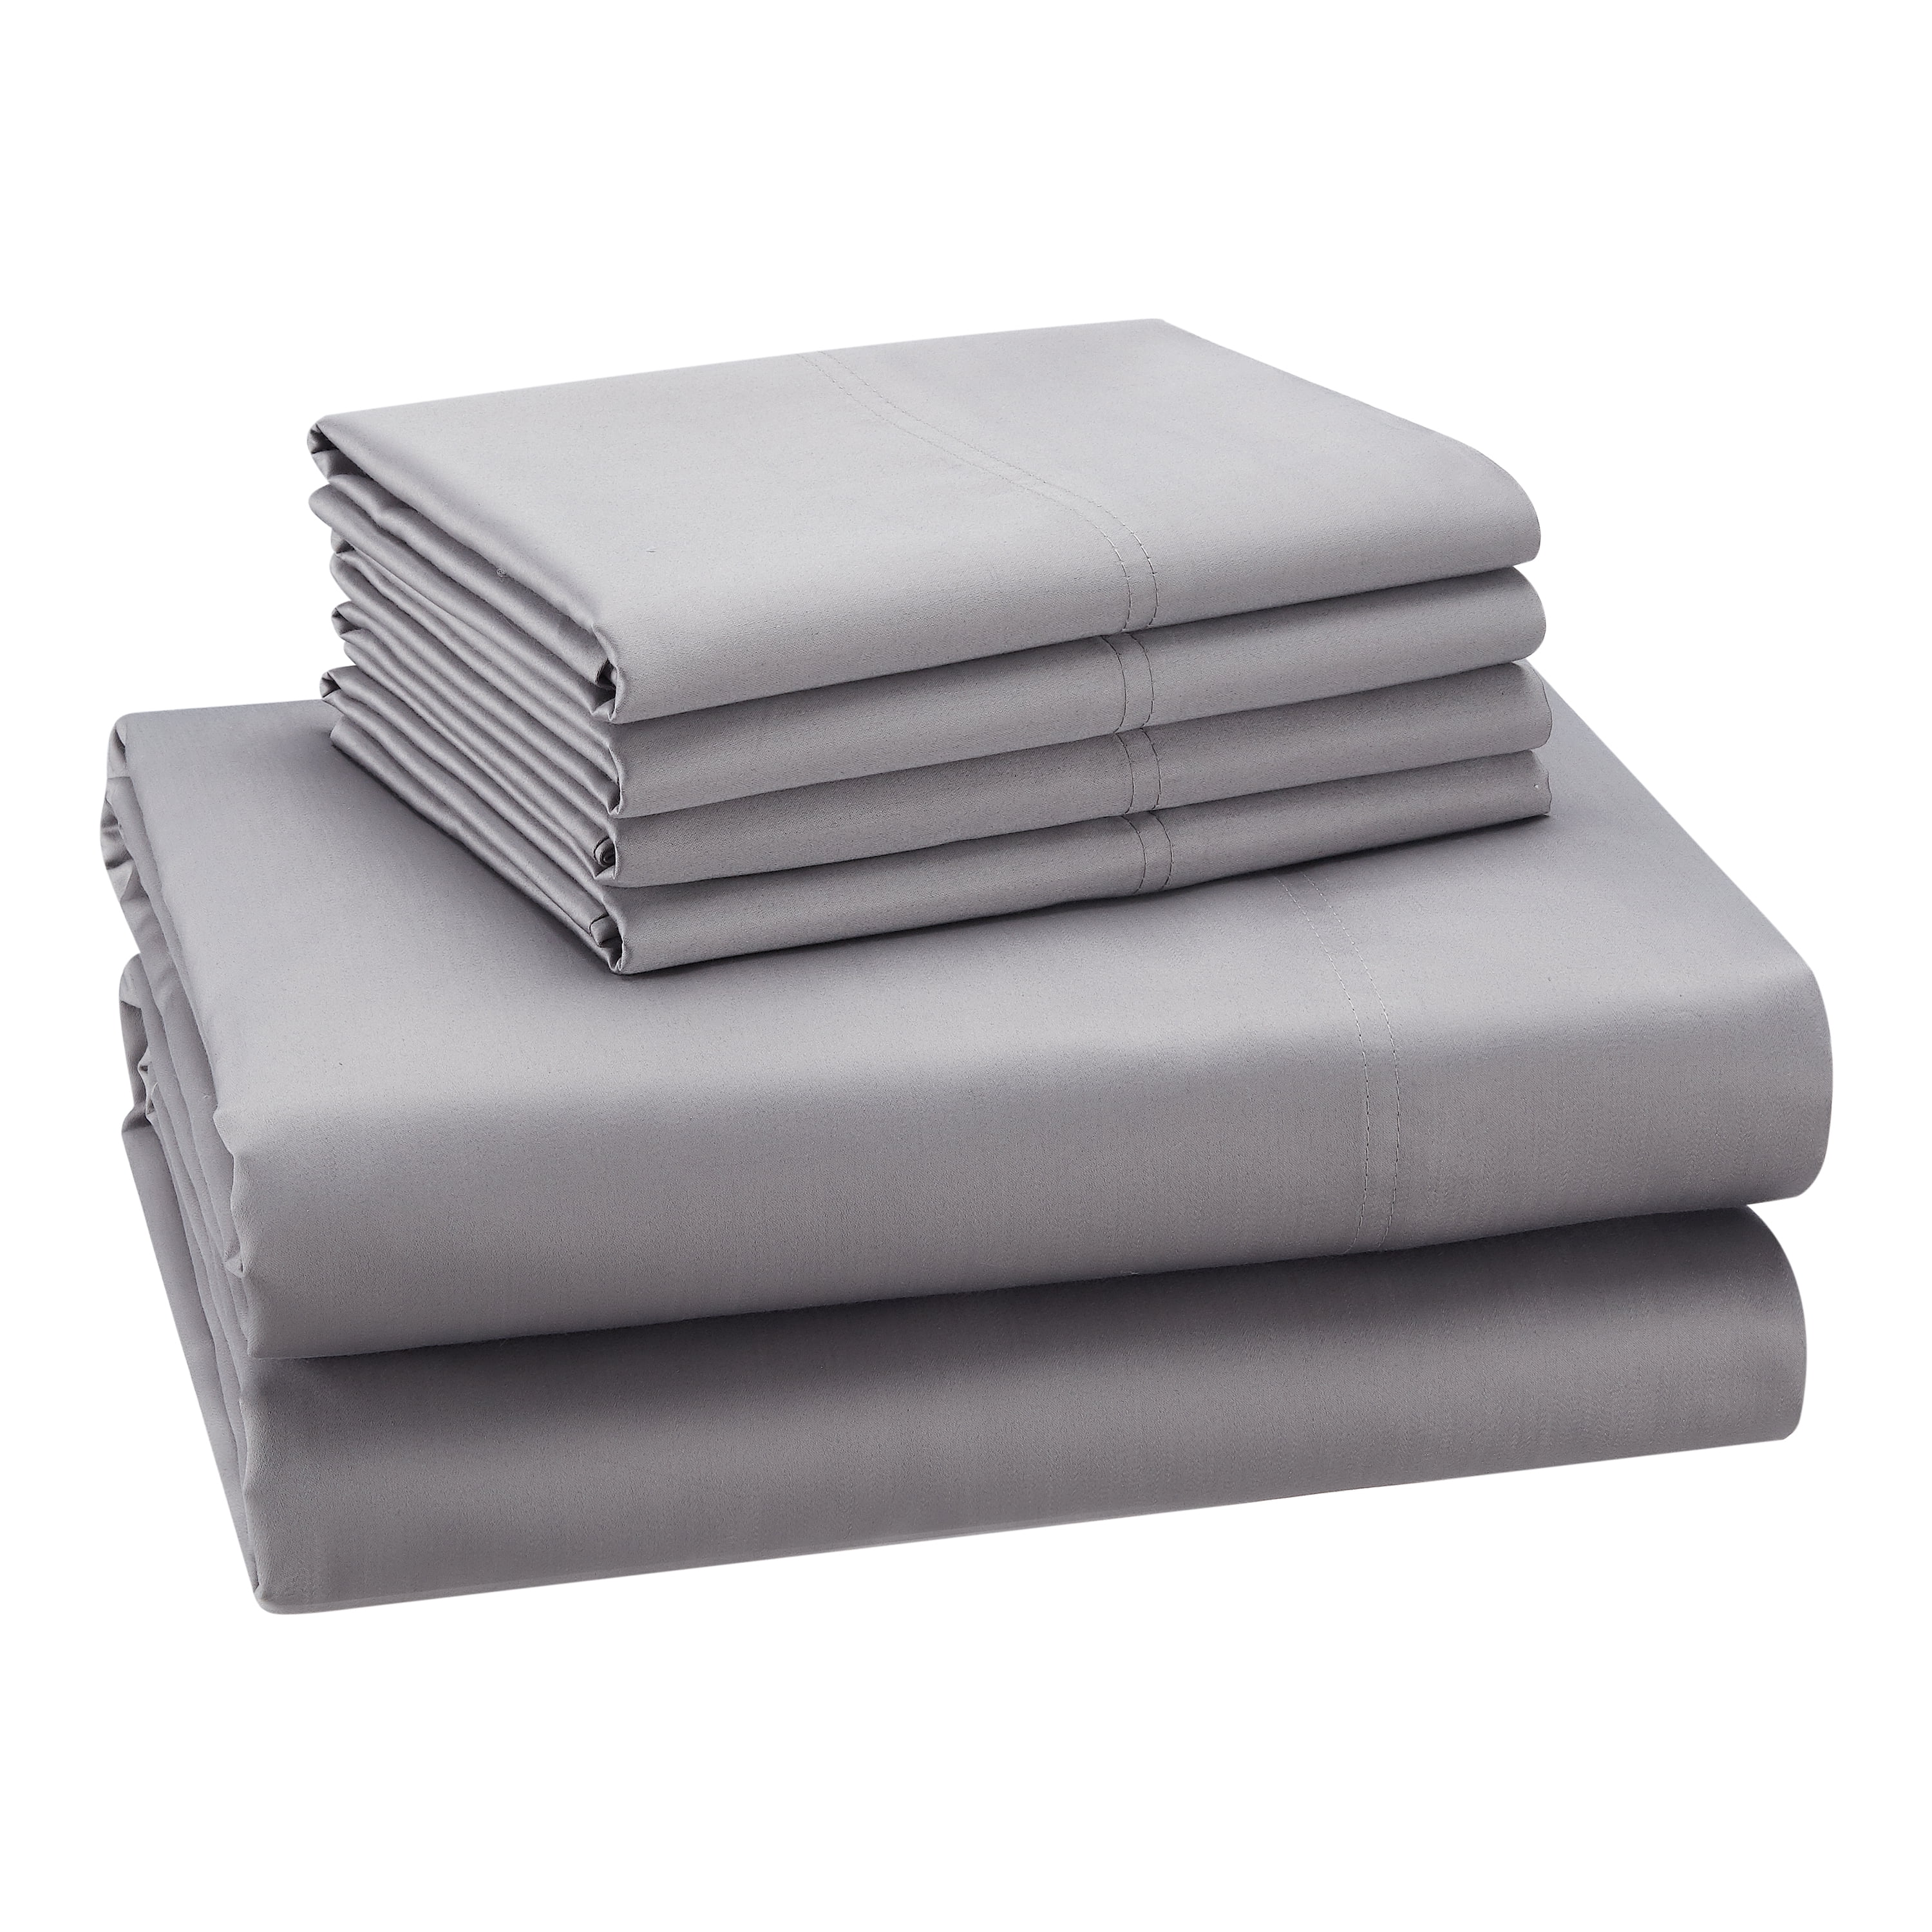 Double Size Hotel 4 Piece Sheet Set 1200 Count Egyptian Cotton Solid Colors